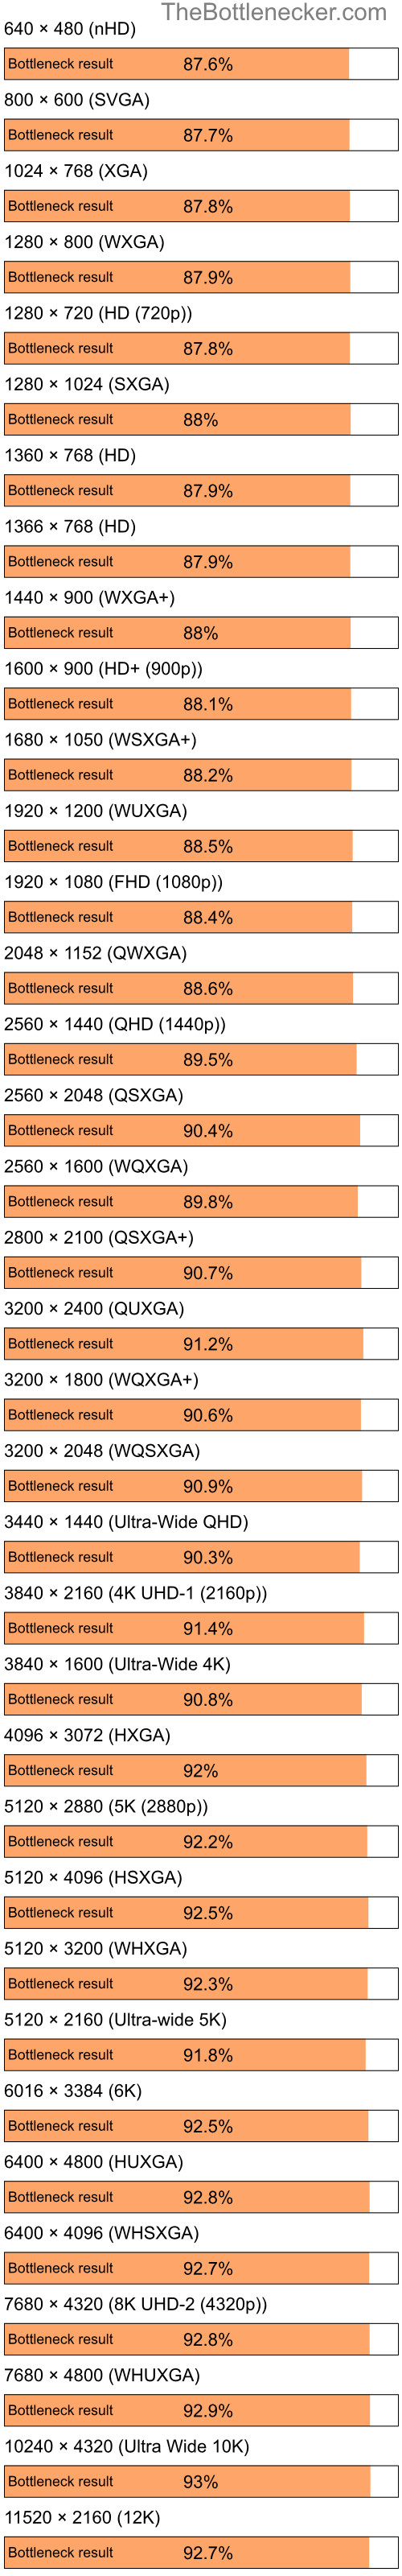 Bottleneck results by resolution for Intel Celeron M 410 and AMD Mobility Radeon 9000 in Processor Intense Tasks